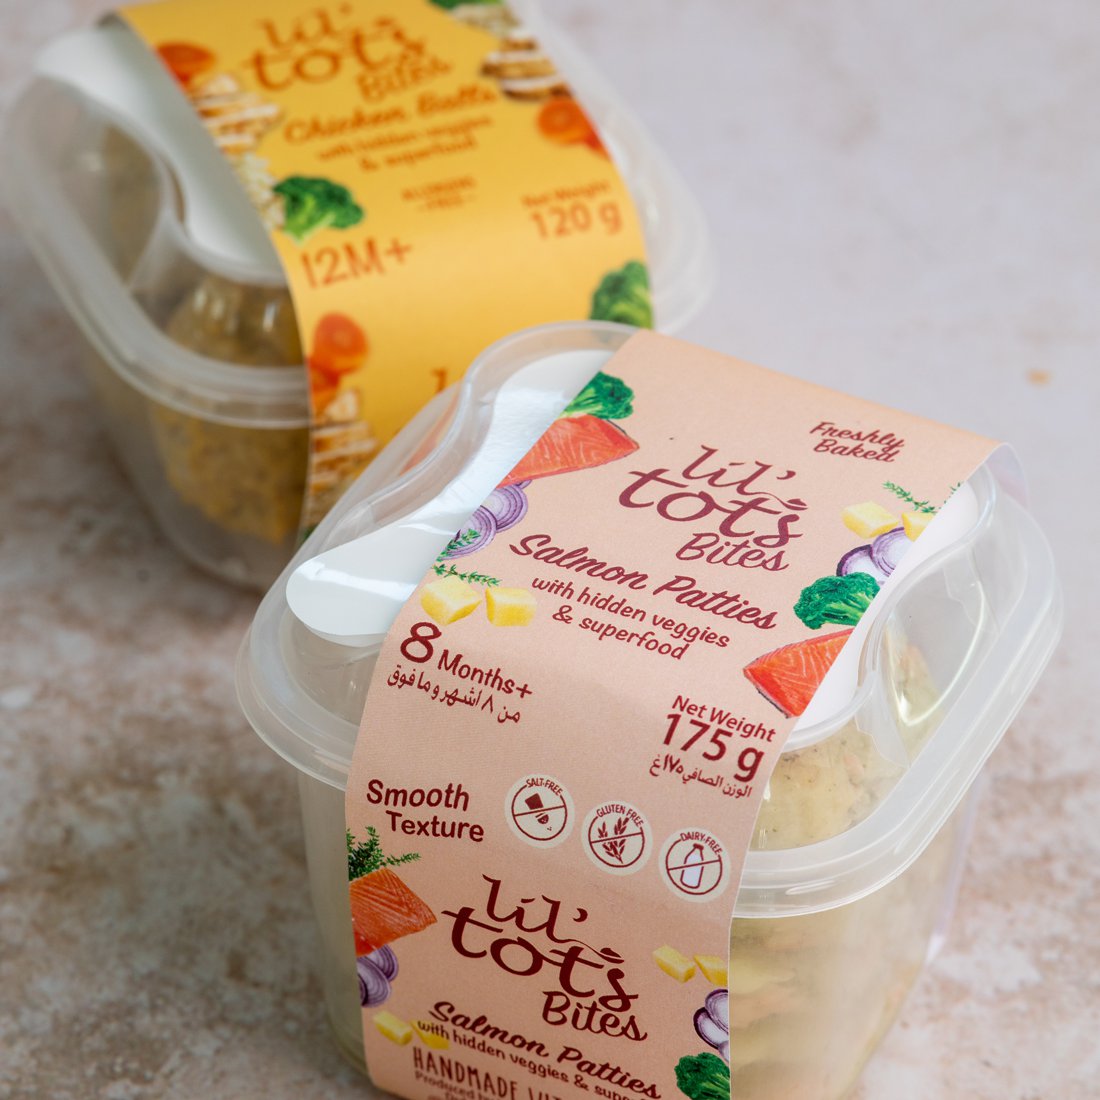 The Lil' Tots packaging is instantly recognisable.